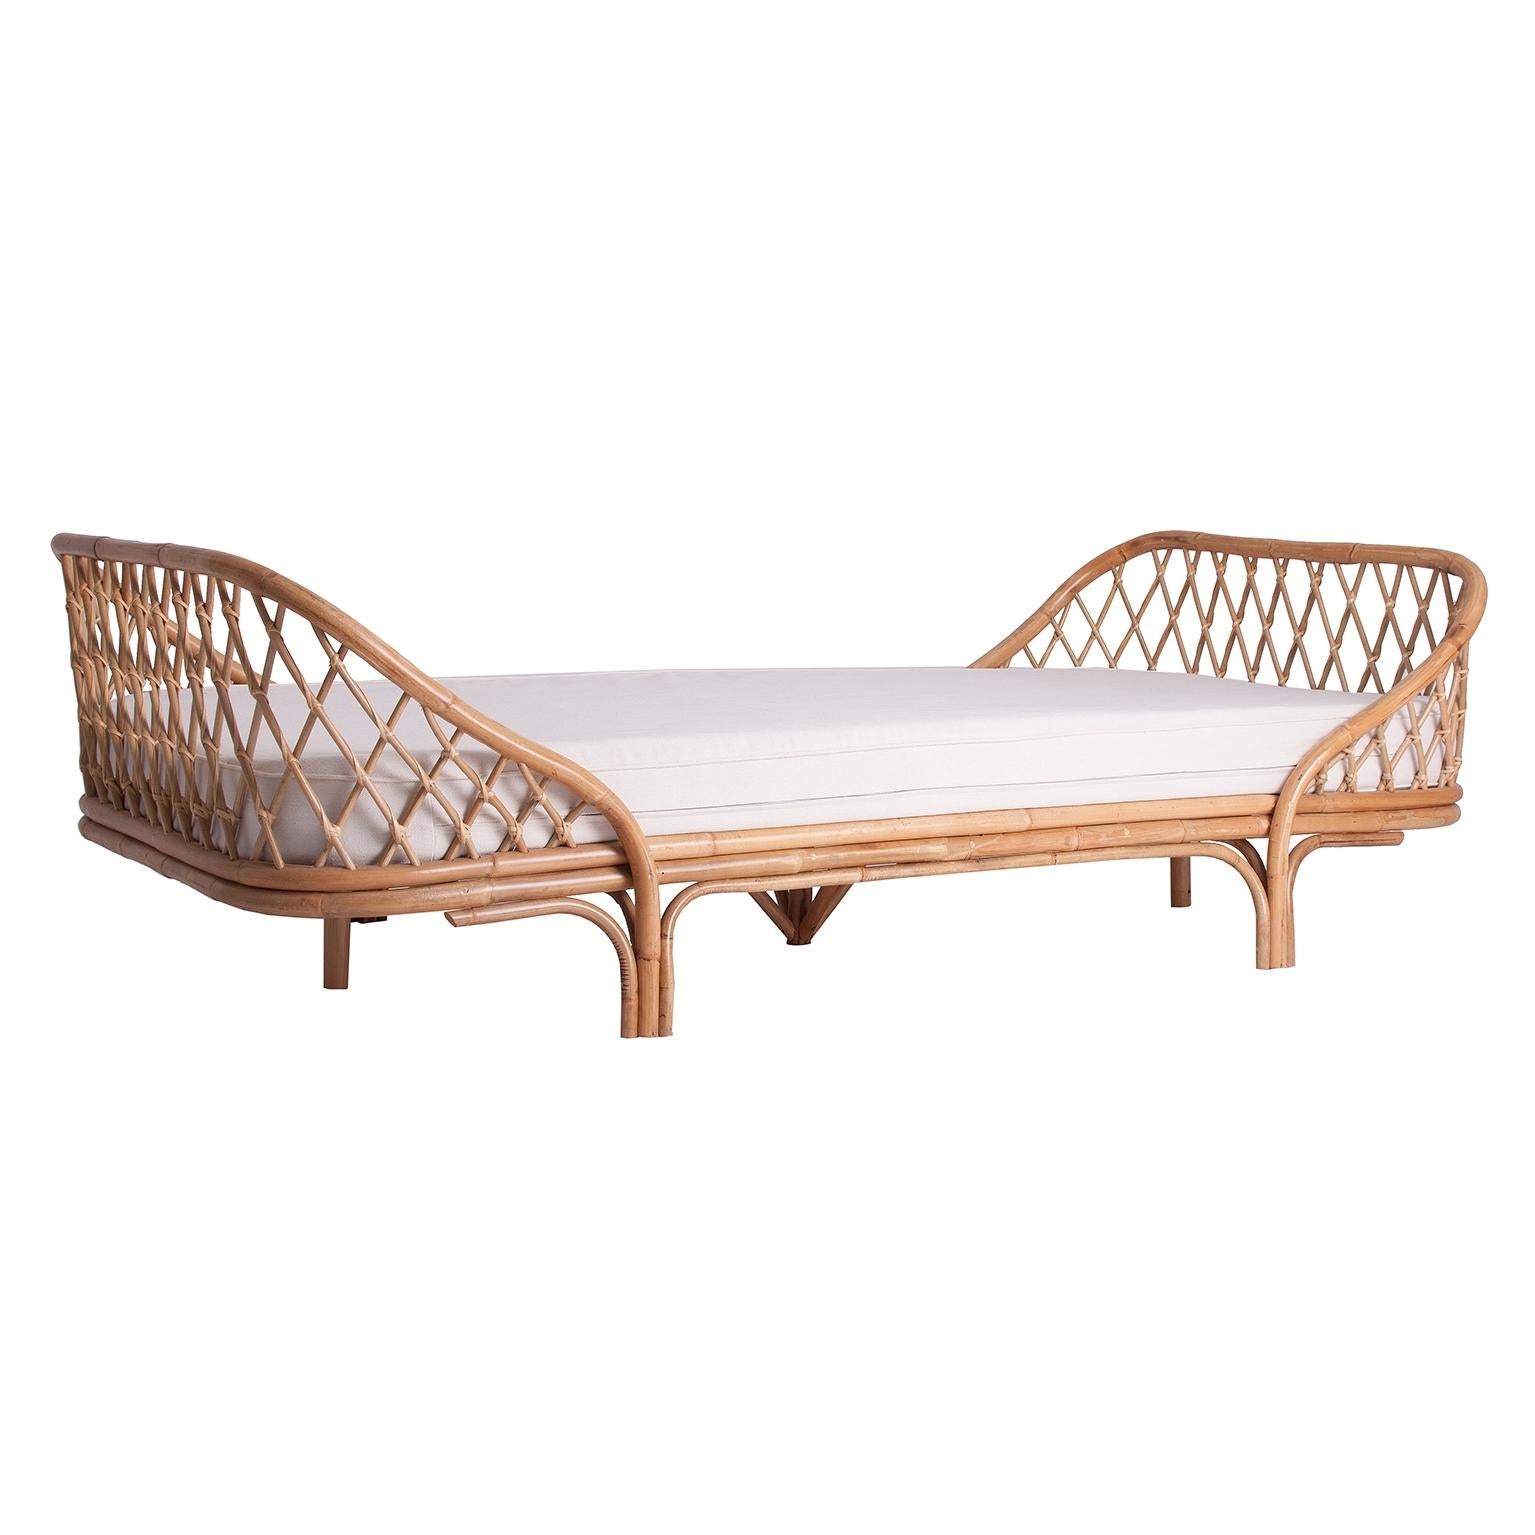 French 1960s design style rattan daybed frame